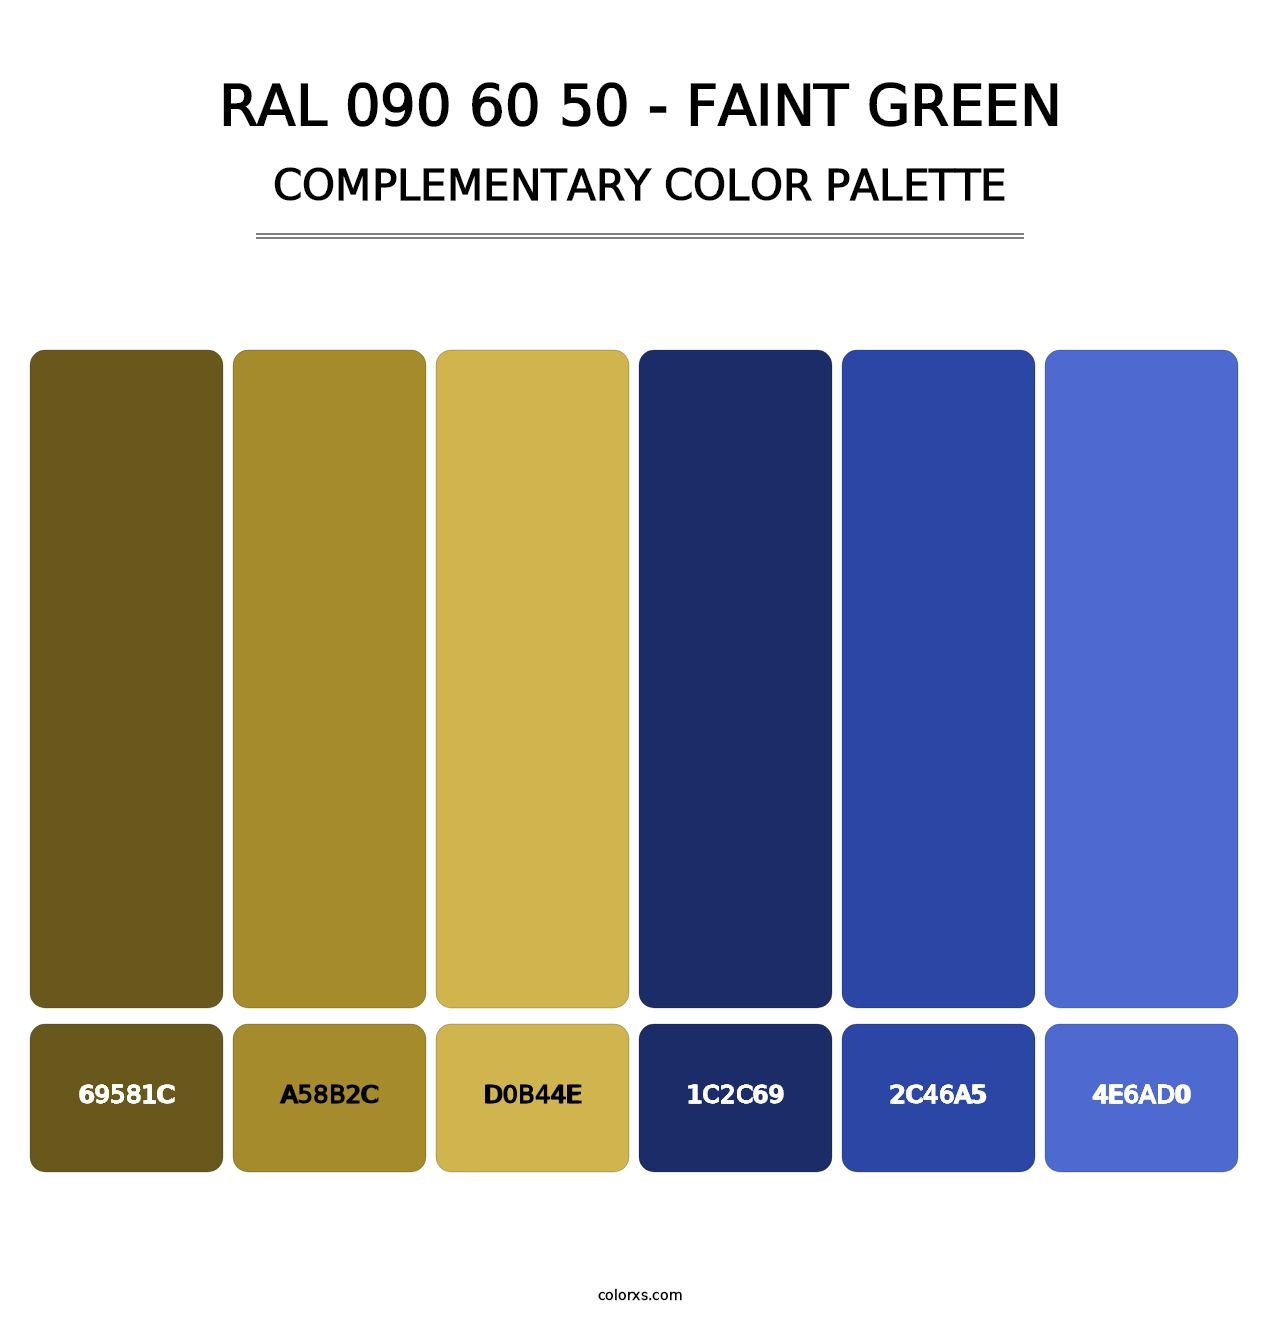 RAL 090 60 50 - Faint Green - Complementary Color Palette